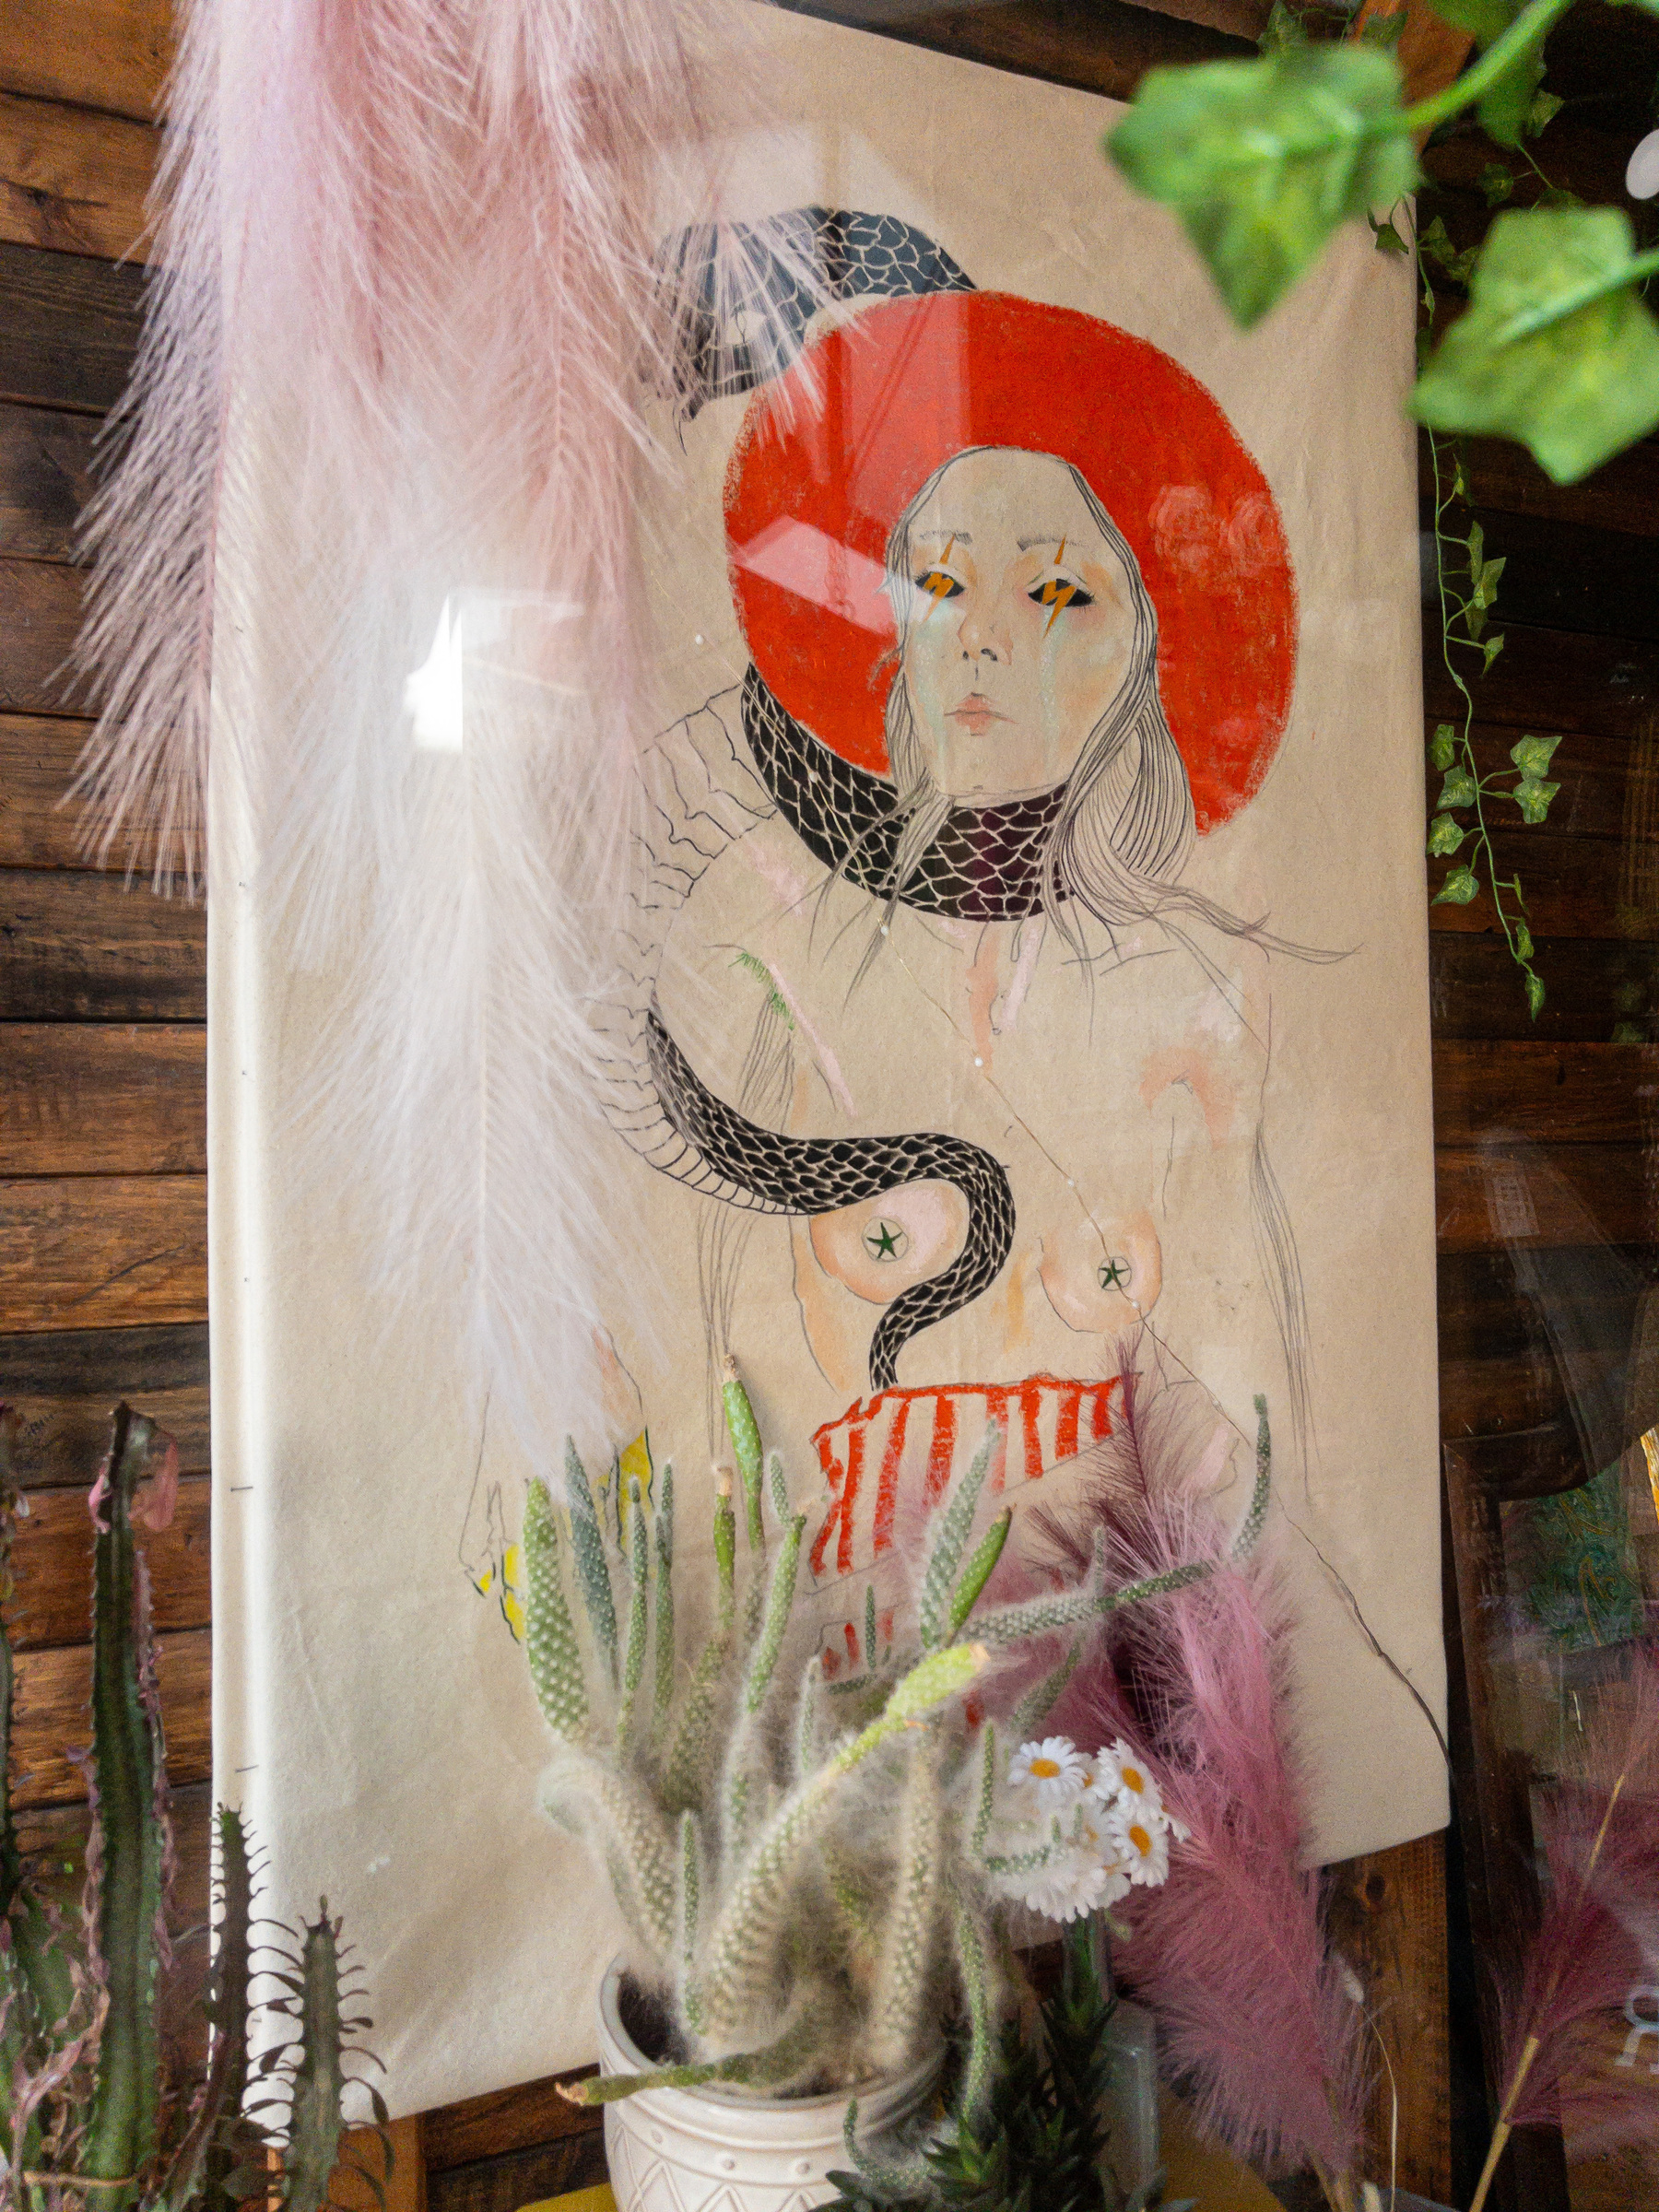 Stylized nude portrait of woman with bright, broad brimmed orange hat, snake wrapped around her neck, with tail wrapped around one breast, in a women’s second hand clothing shop window.